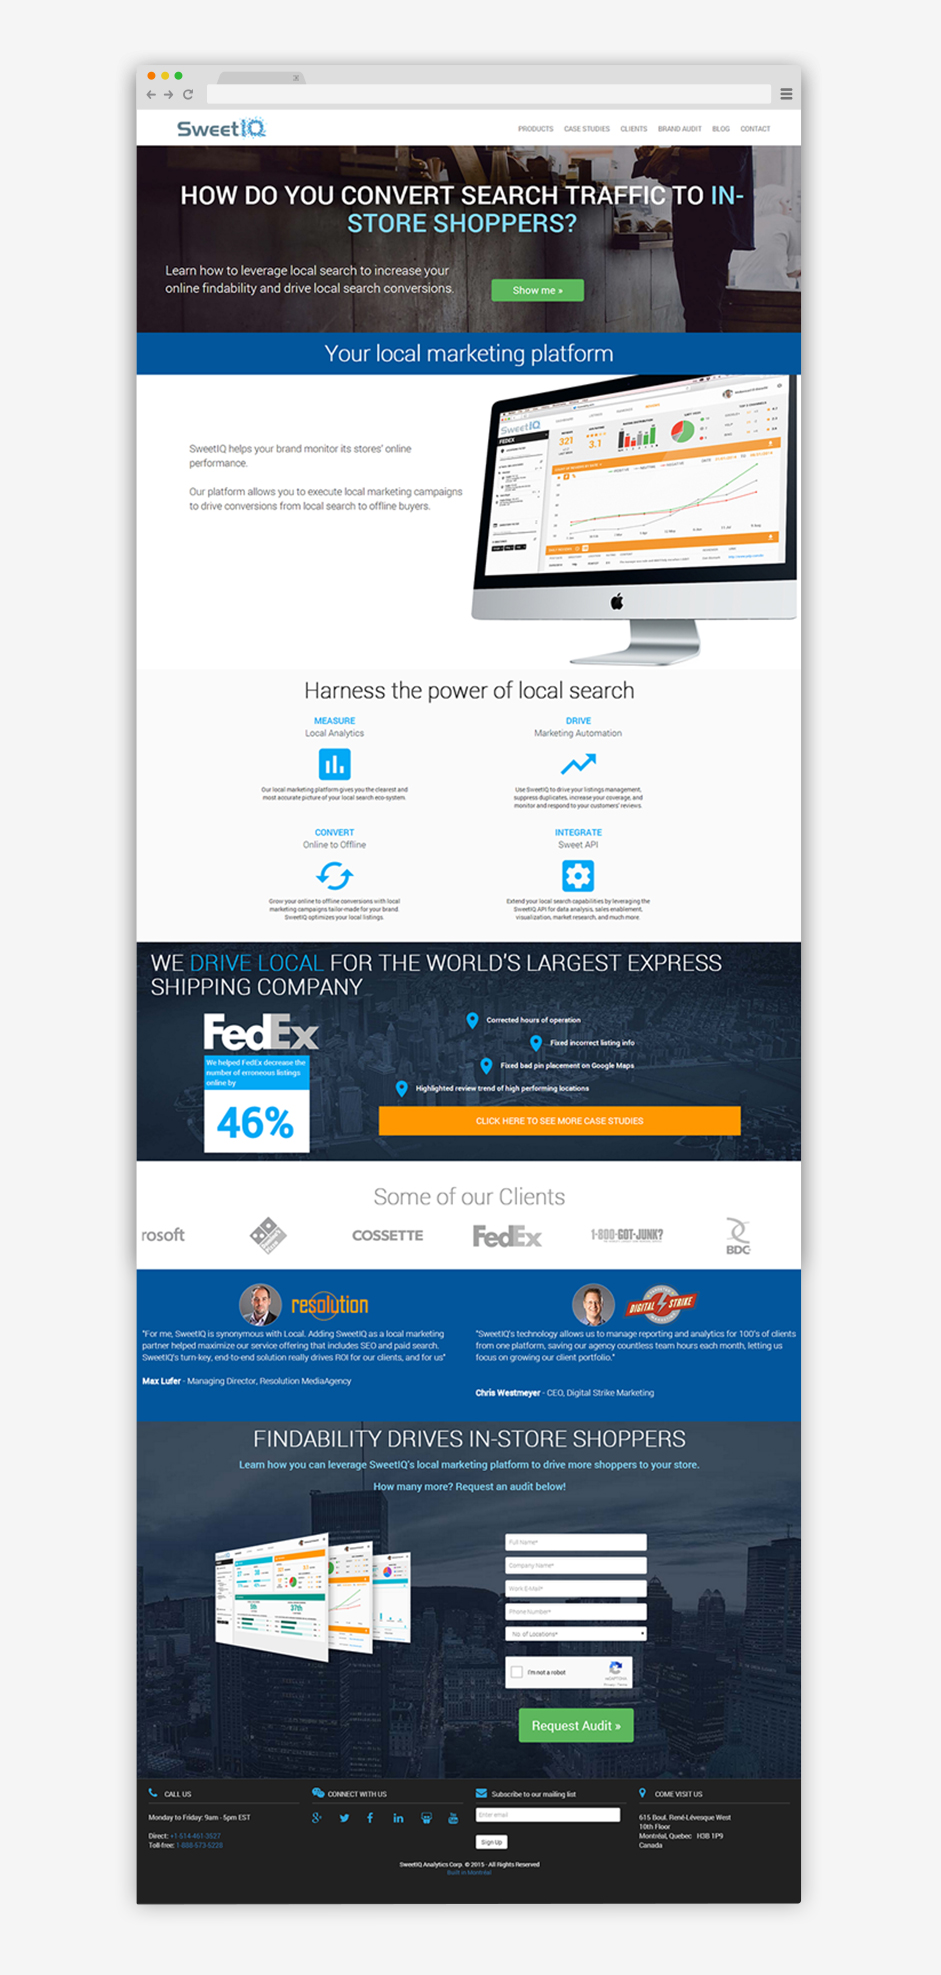 landing-pages